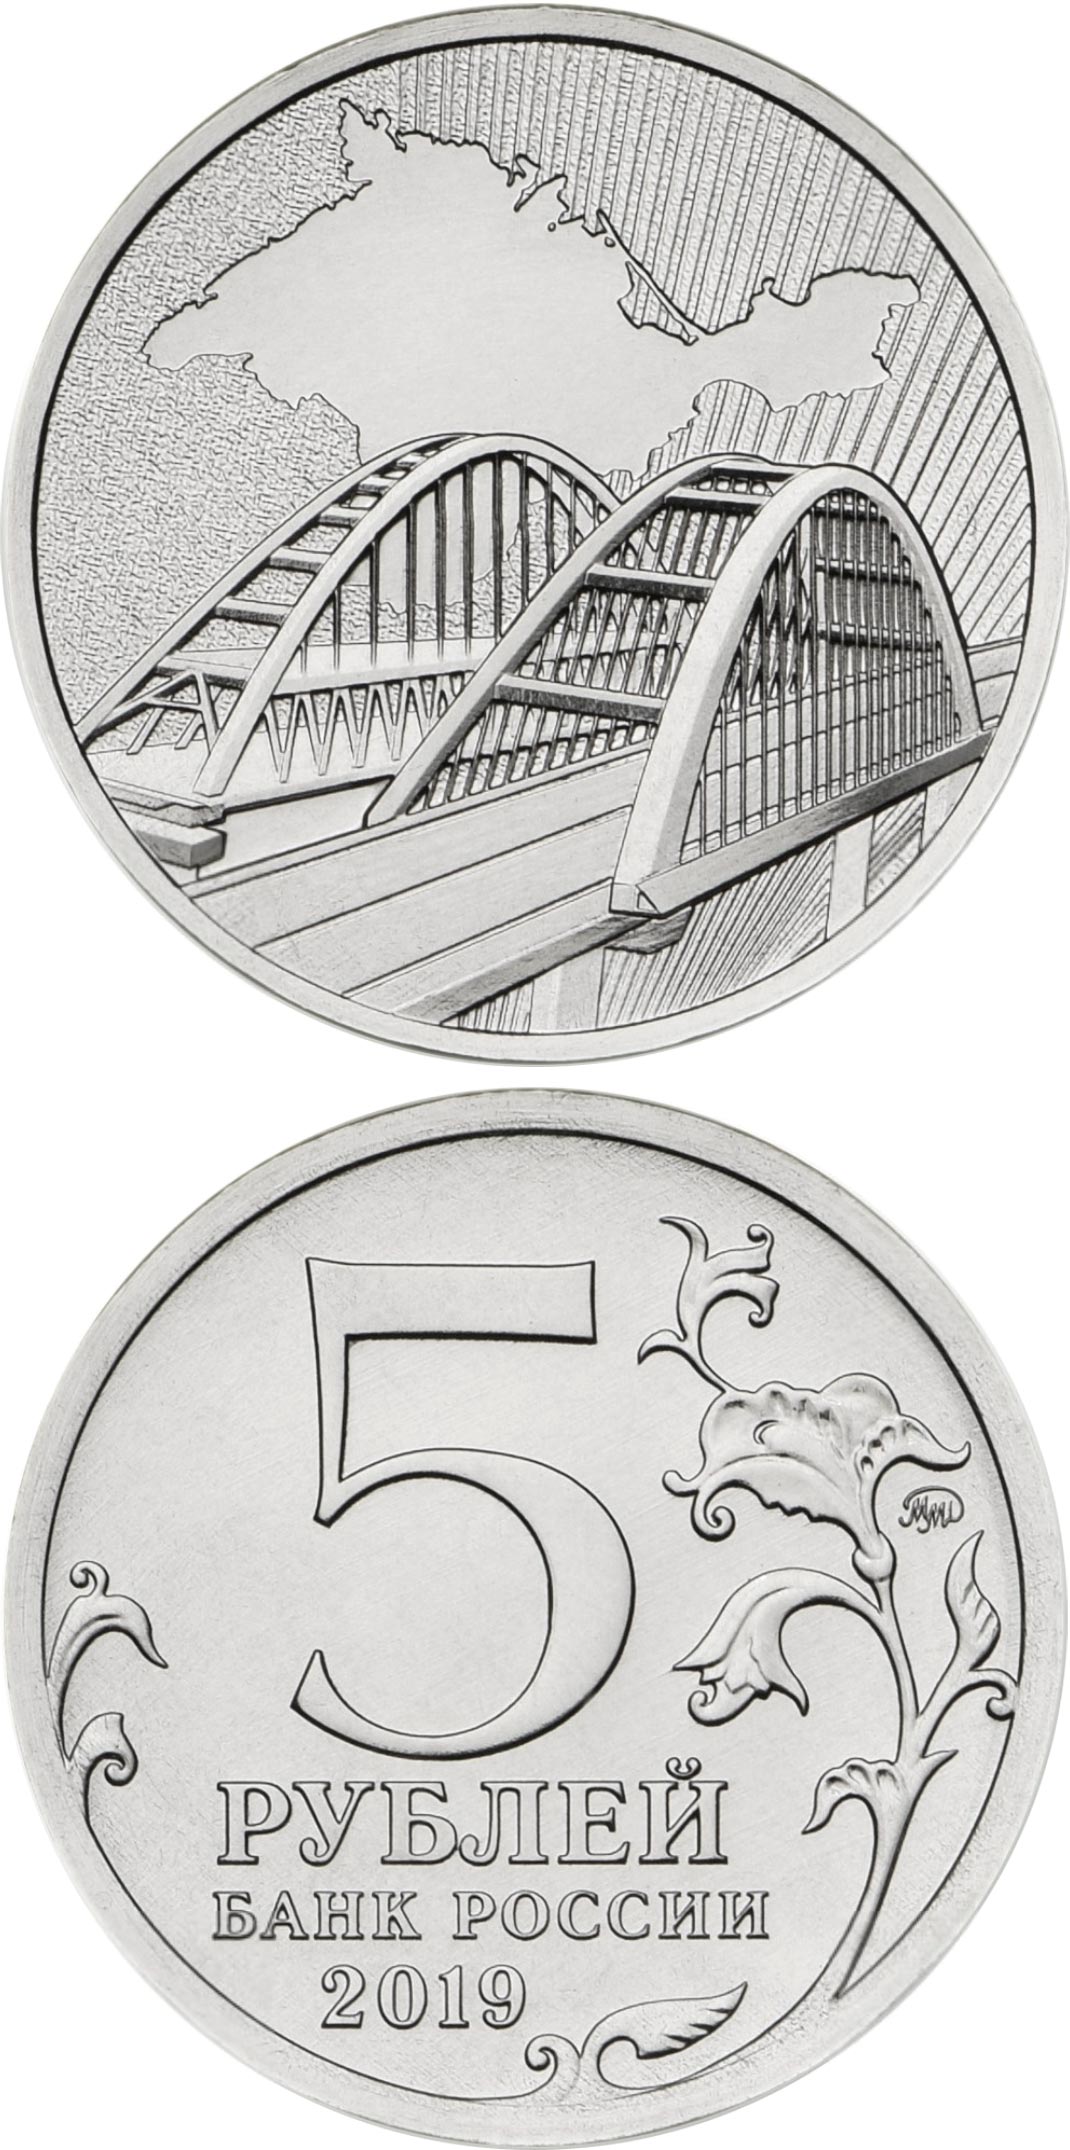 Image of 5 rubles coin - Fifth anniversary of the referendum on the status of the Crimea and Sevastopol | Russia 2019.  The Copper–Nickel (CuNi) coin is of UNC quality.